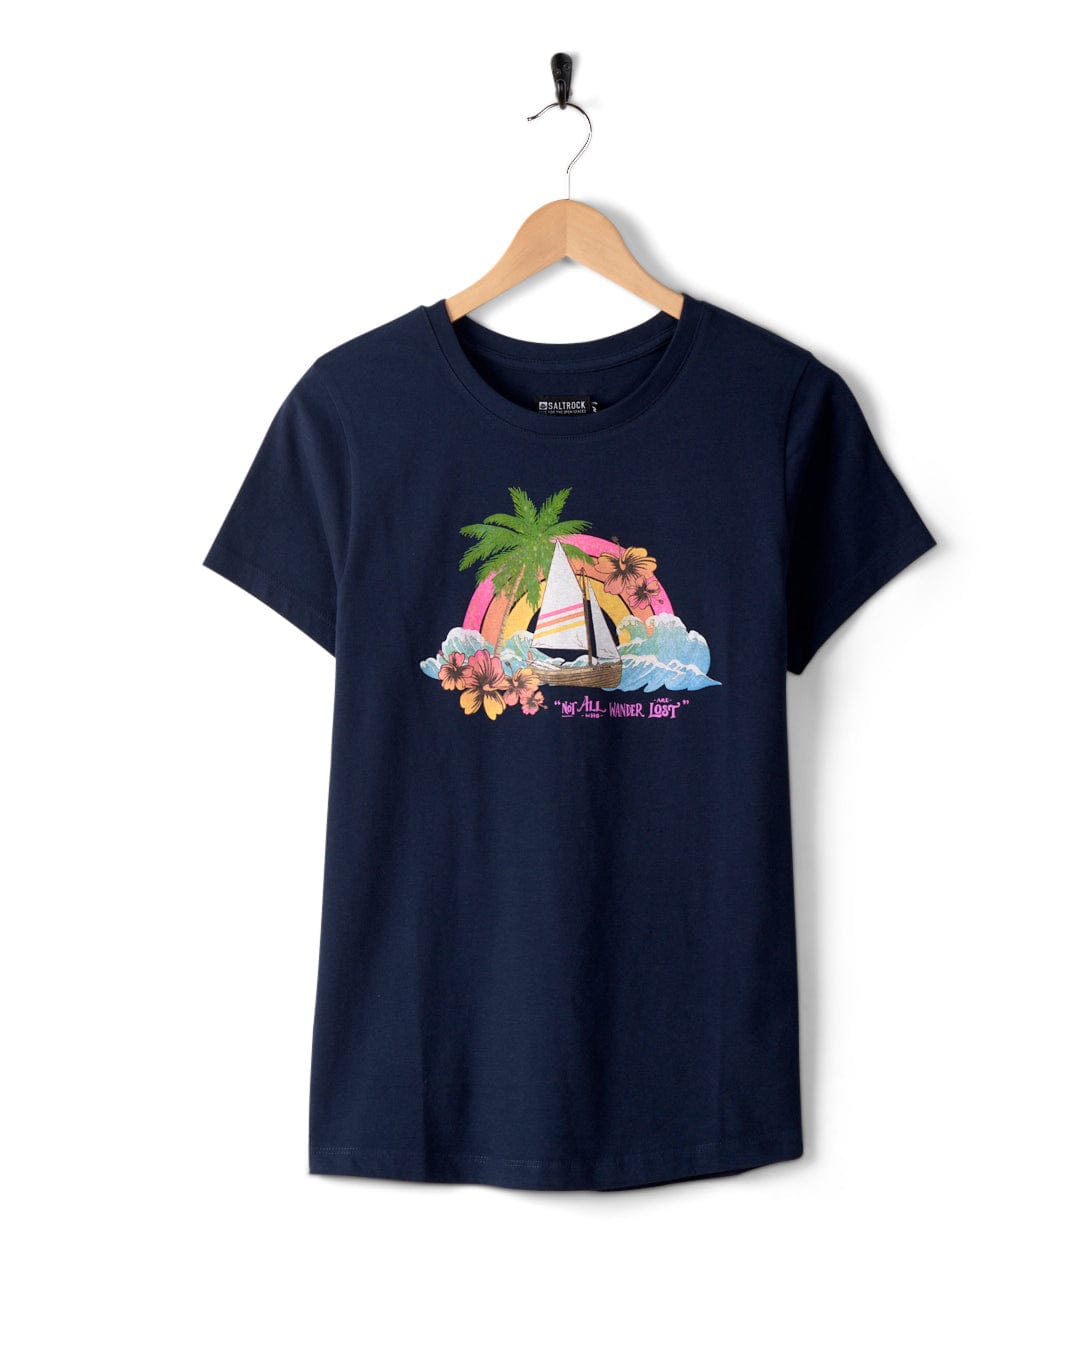 A navy blue Floral Lost Ships - Womens T-Shirt - Blue featuring the Saltrock graphic with a sailboat, palm trees, and flowers. The text "All waves lead" is displayed on a wooden hanger against a white background. Made from 100% cotton and machine washable for easy care.